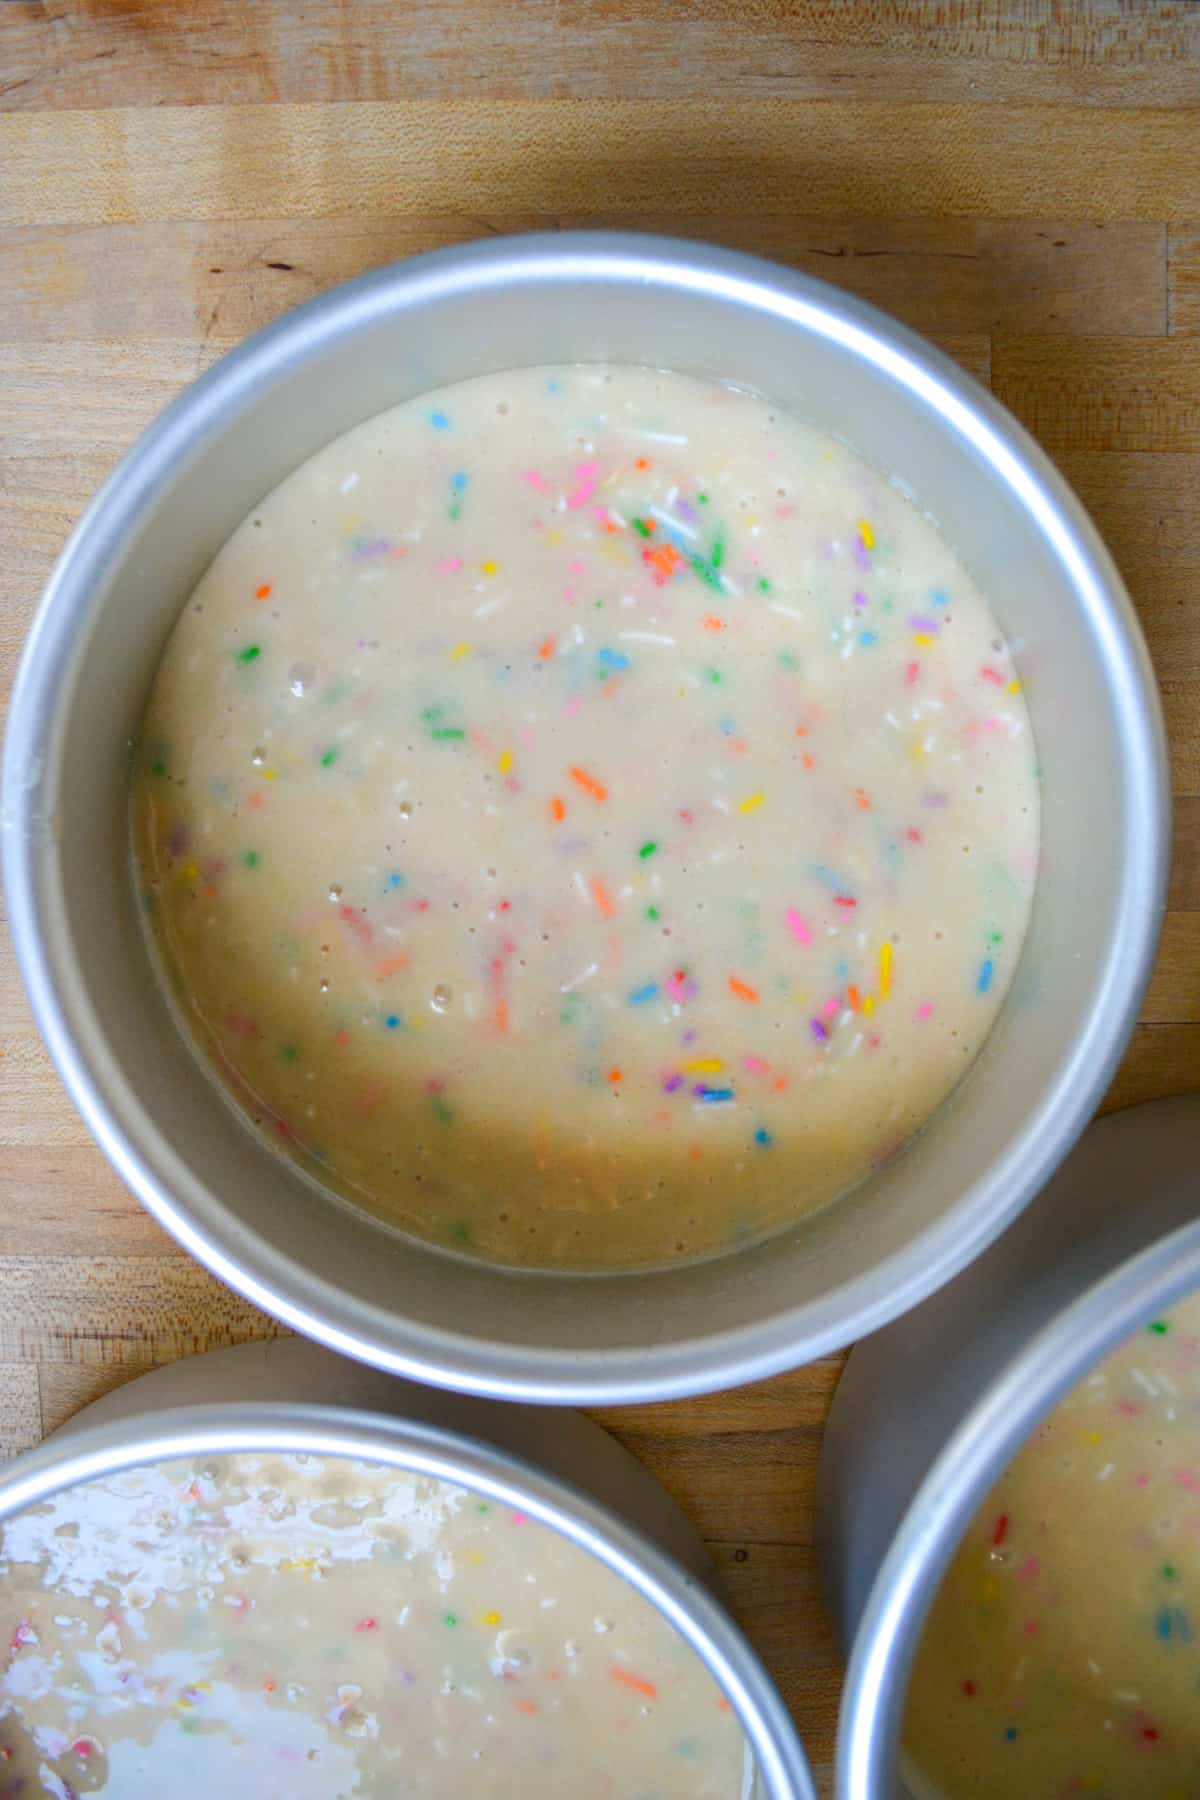 Cake batter with sprinkles mixed into it poured into a round cake pan.